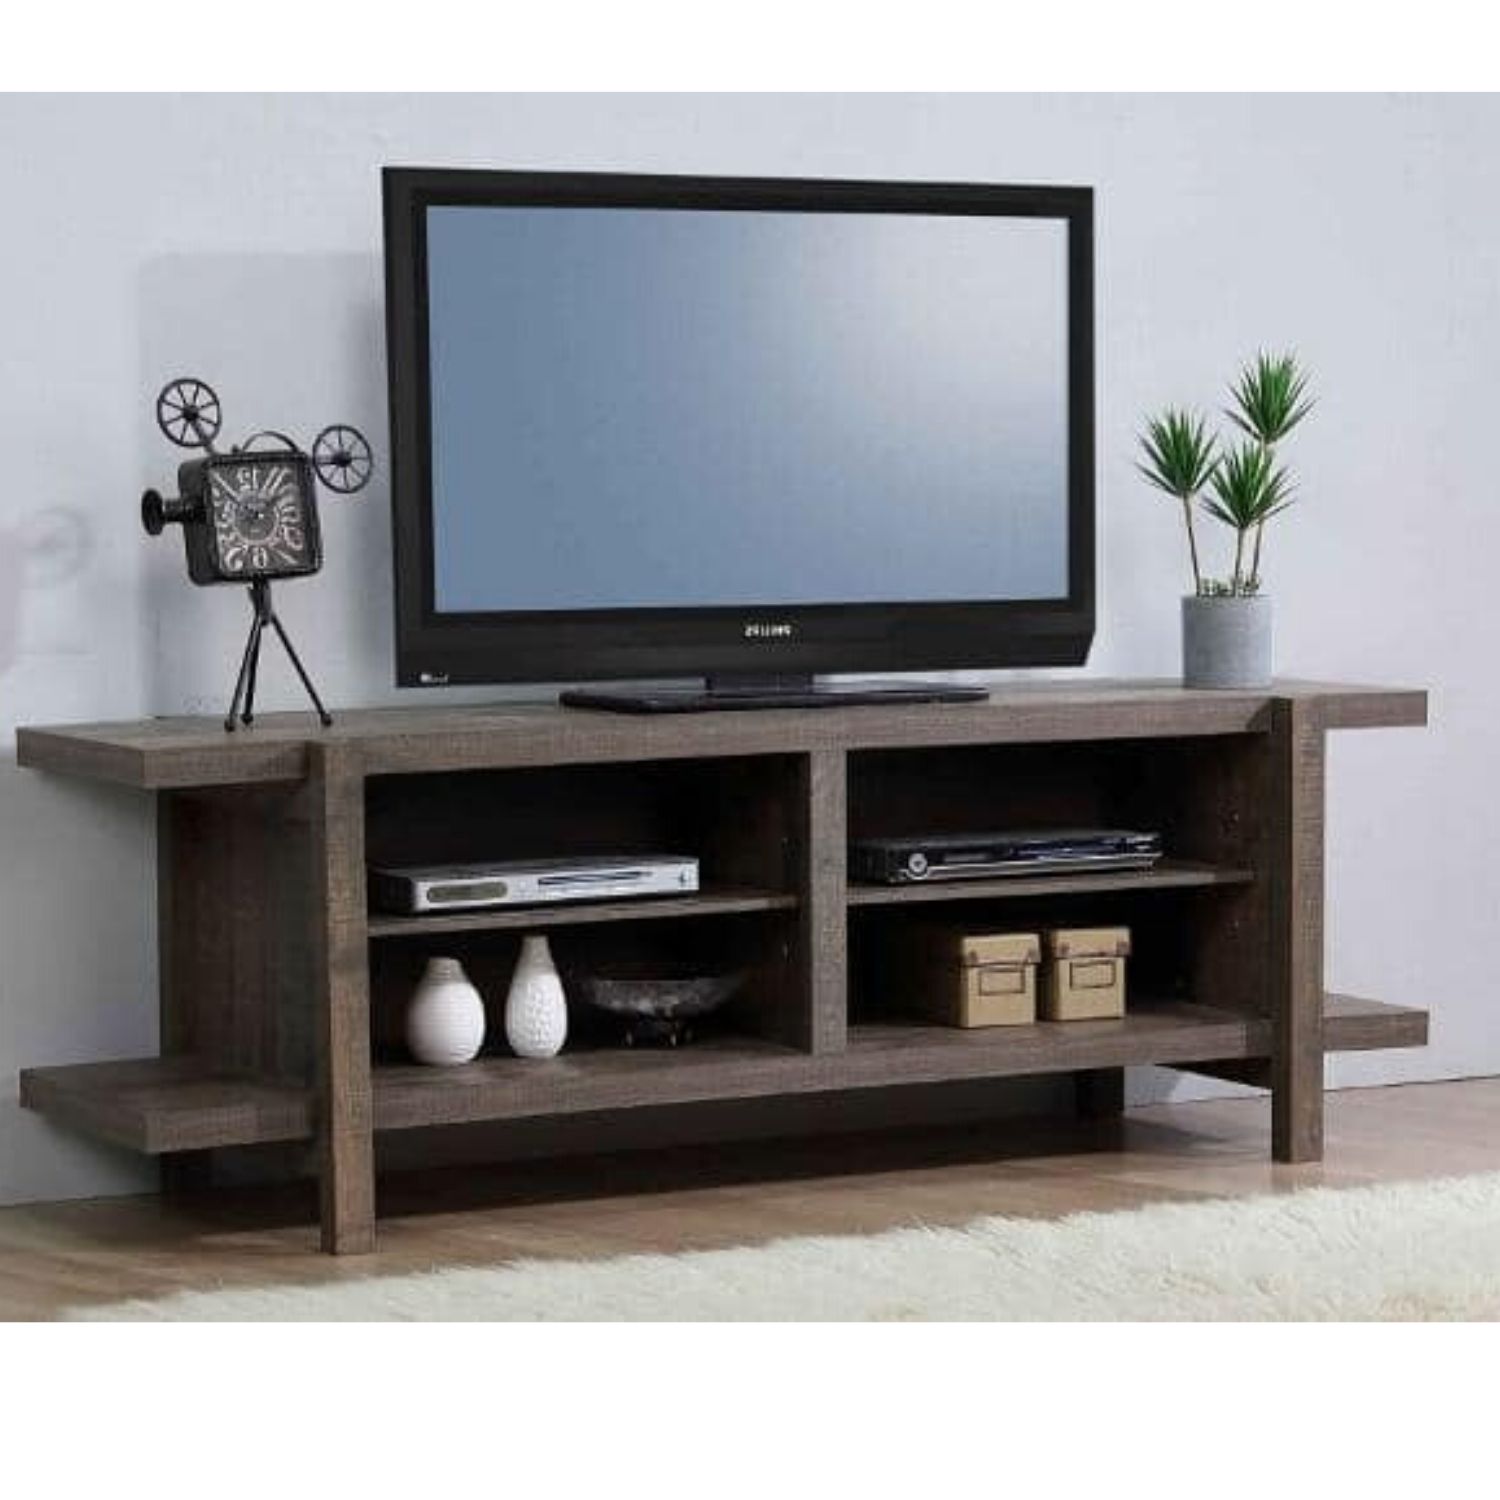 Tammy 65'' Tv Stand For Tvs Up To 70'', Rustic Mdf Wood Tv In Brigner Tv Stands For Tvs Up To 65" (View 7 of 20)